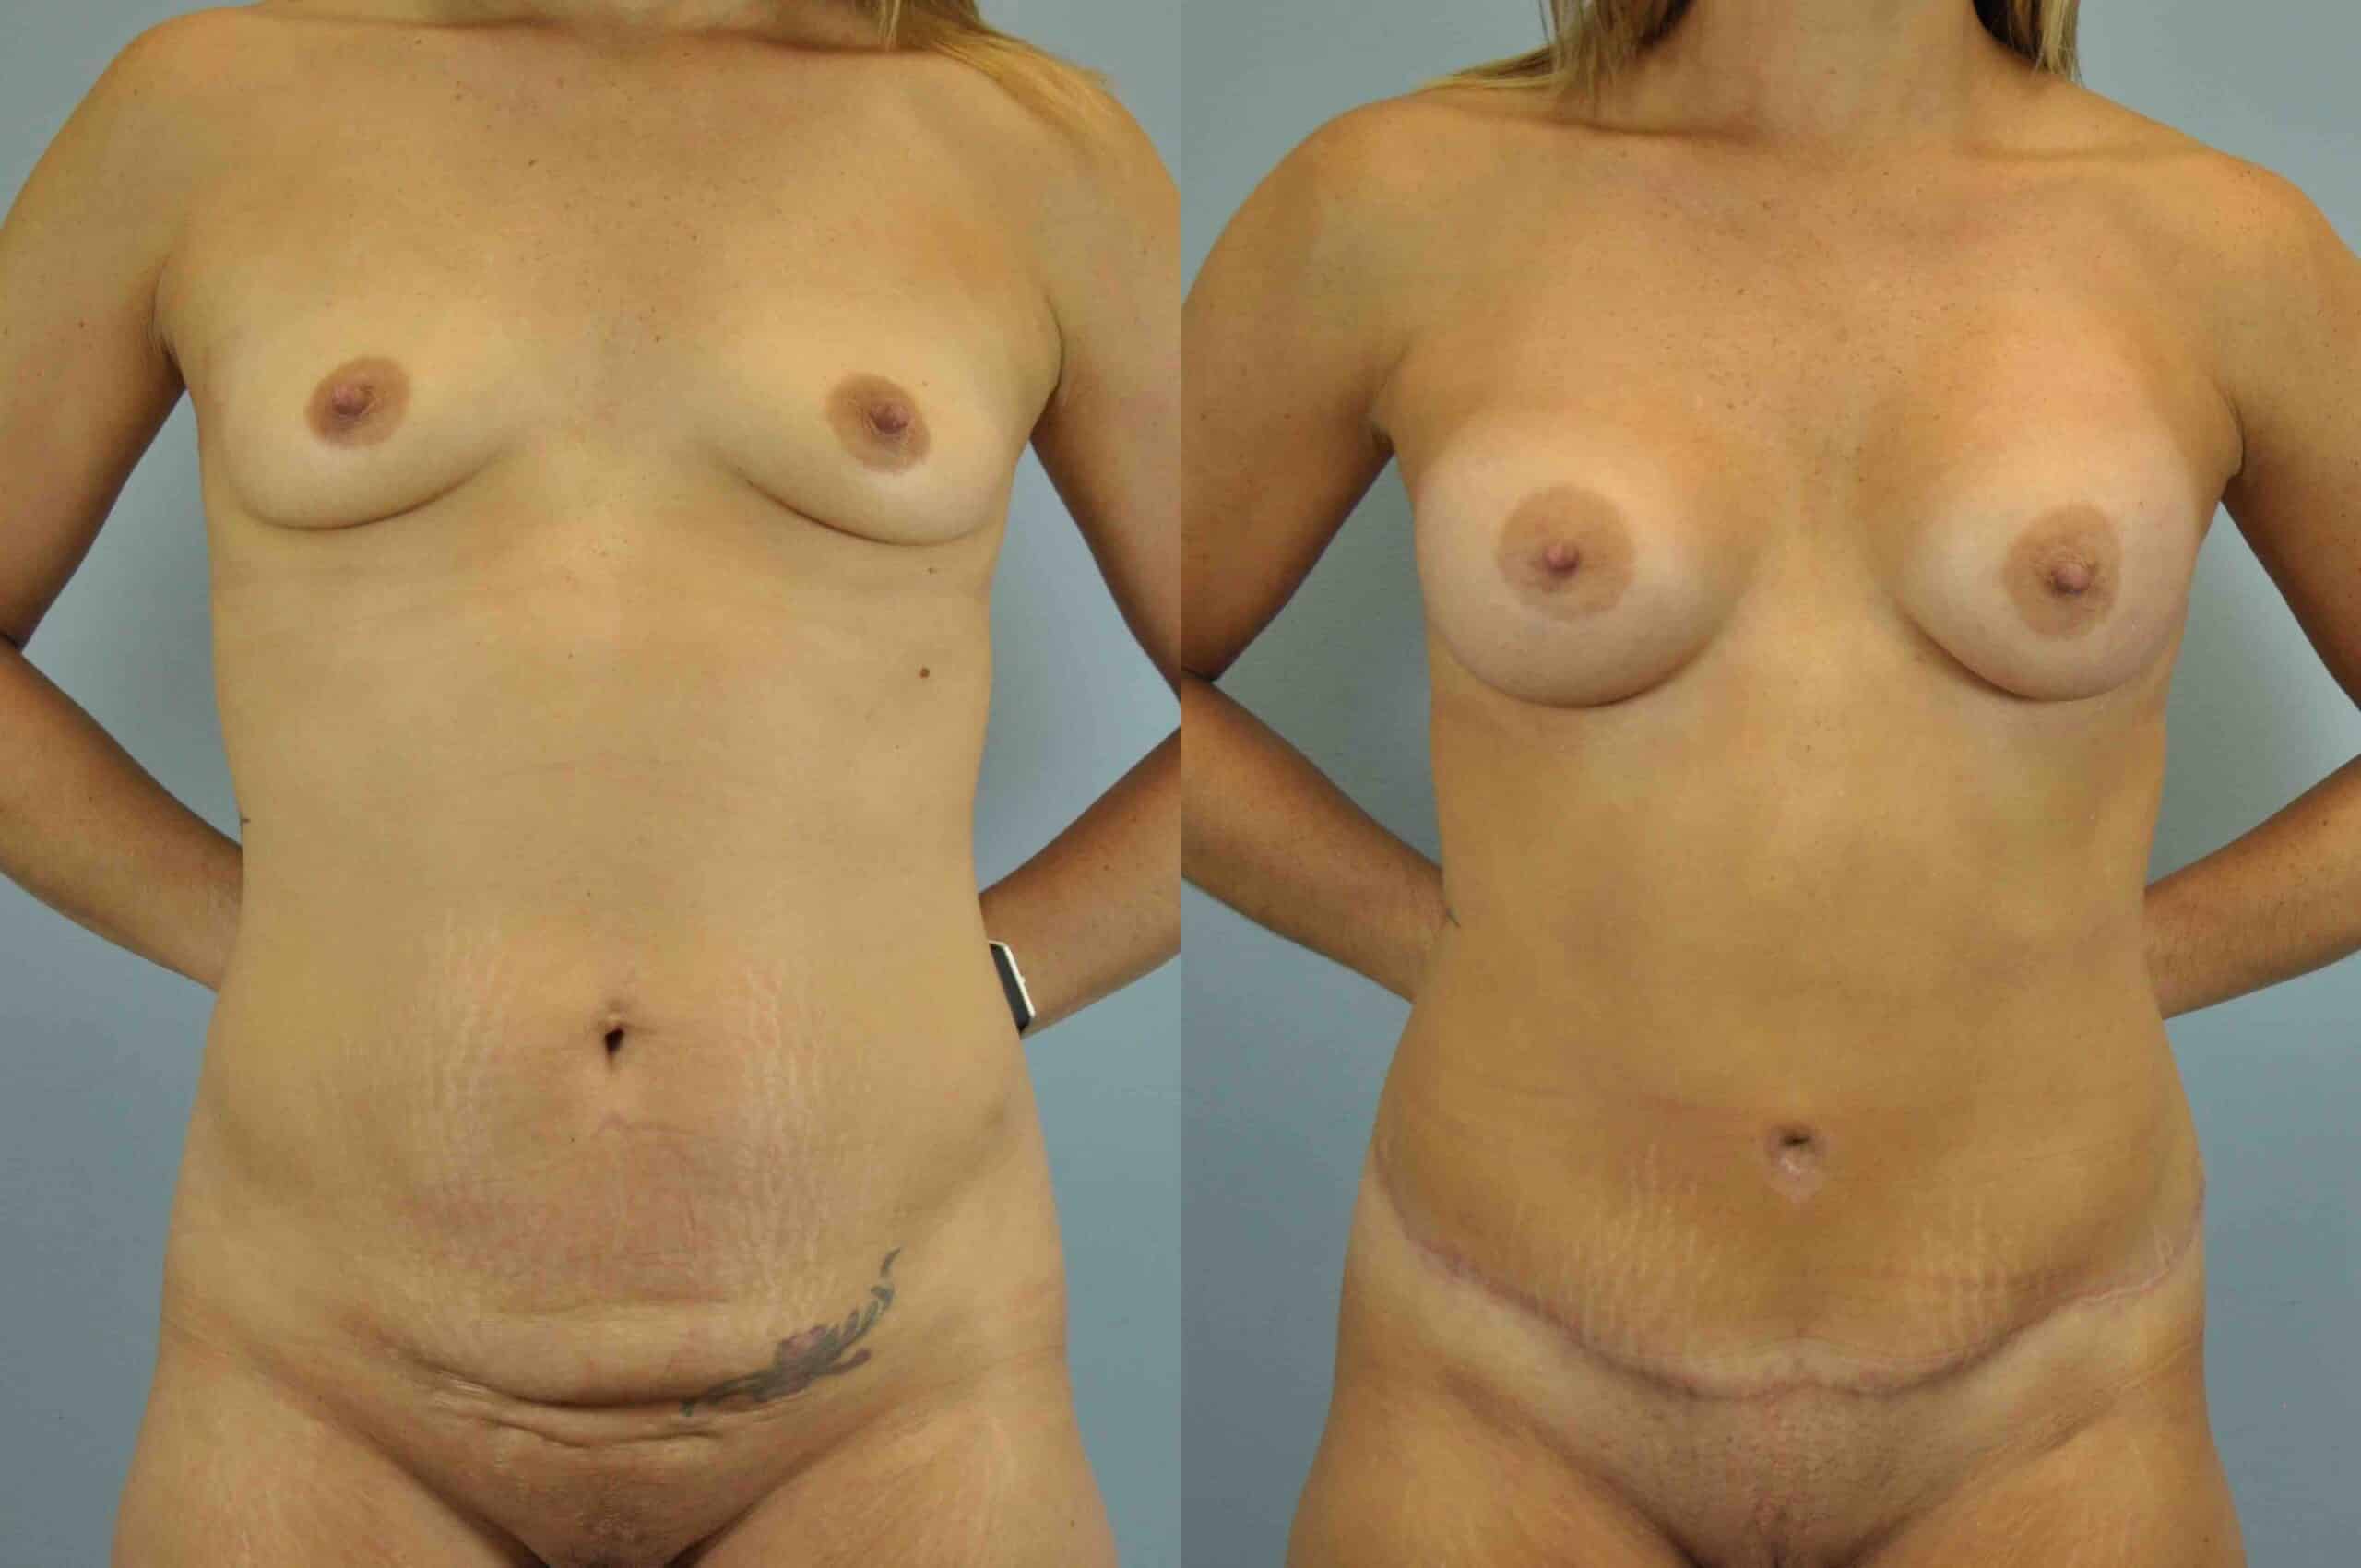 Before and after, 2 mo post op from Tummy Tuck, Breast Augmentation performed by Dr. Paul Vanek (front view)